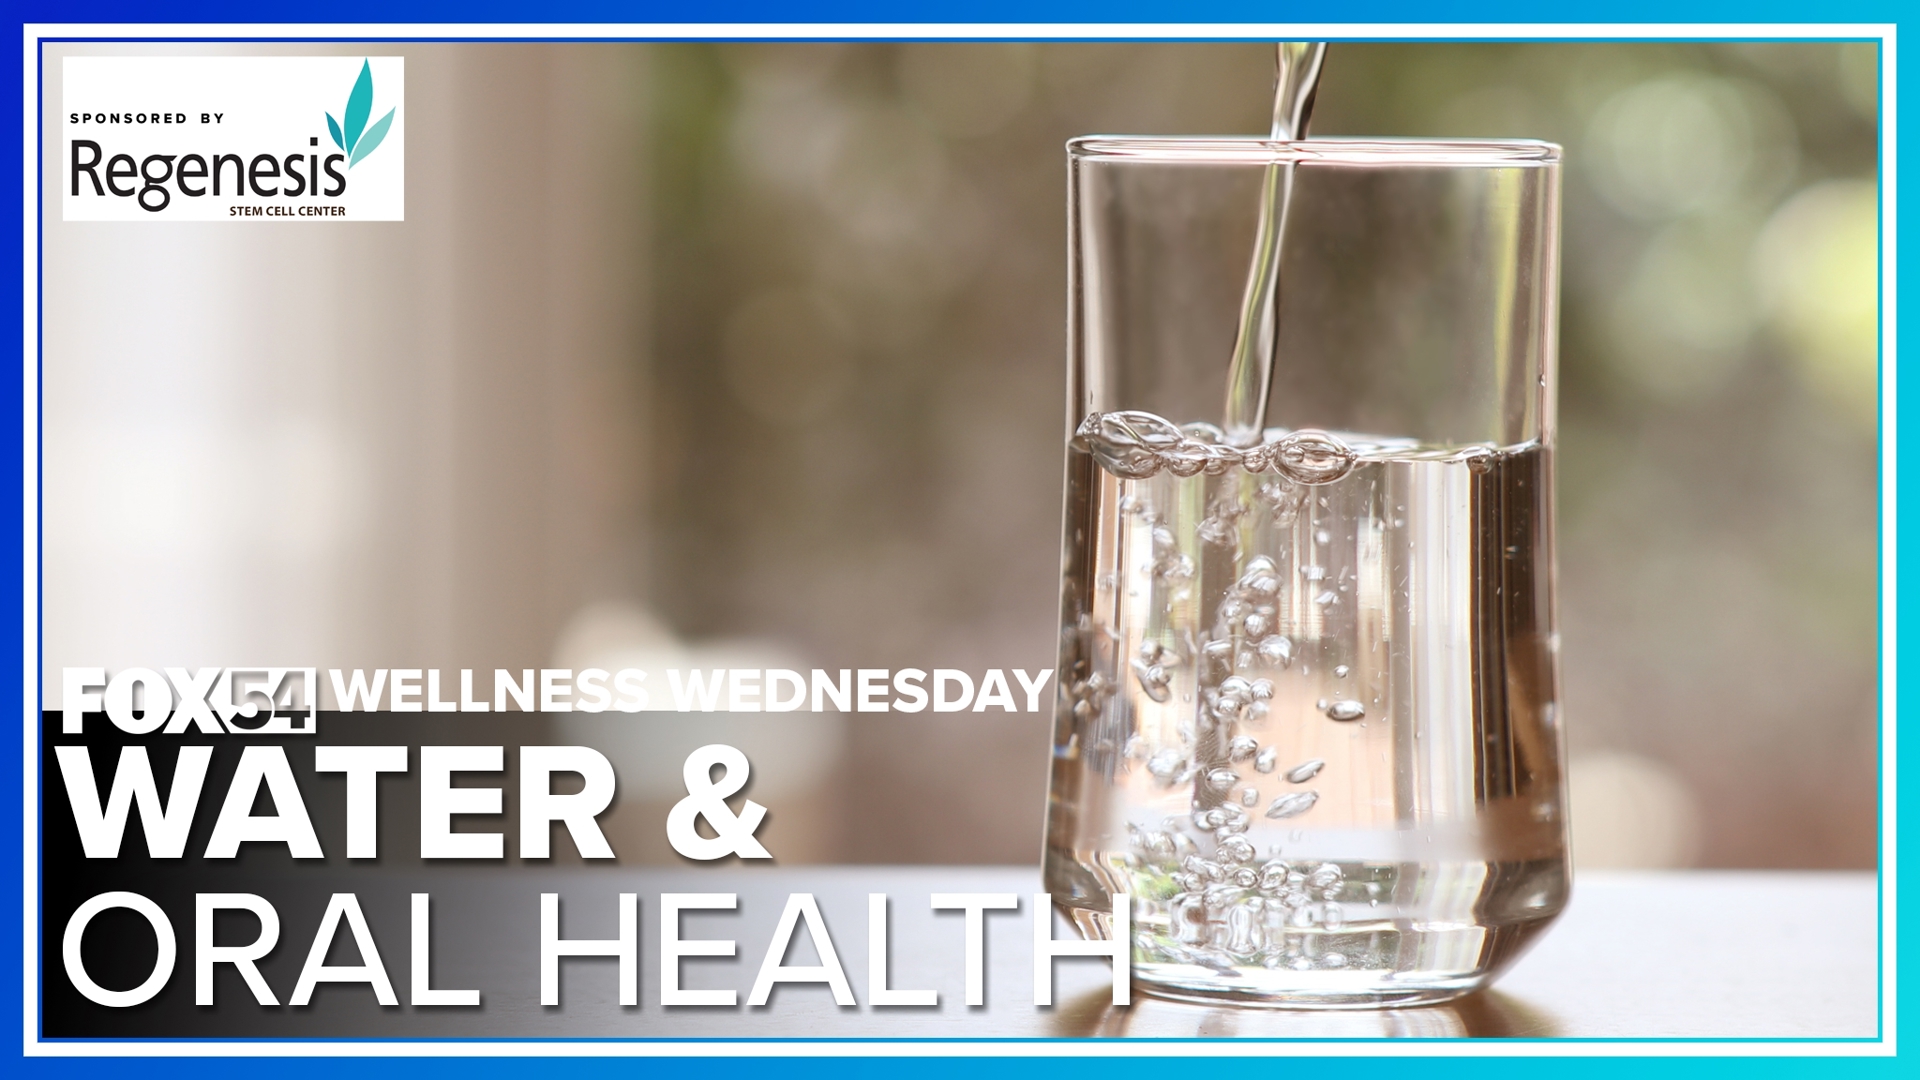 Our Jasamine Byrd shows us how this week is all about health and hydration